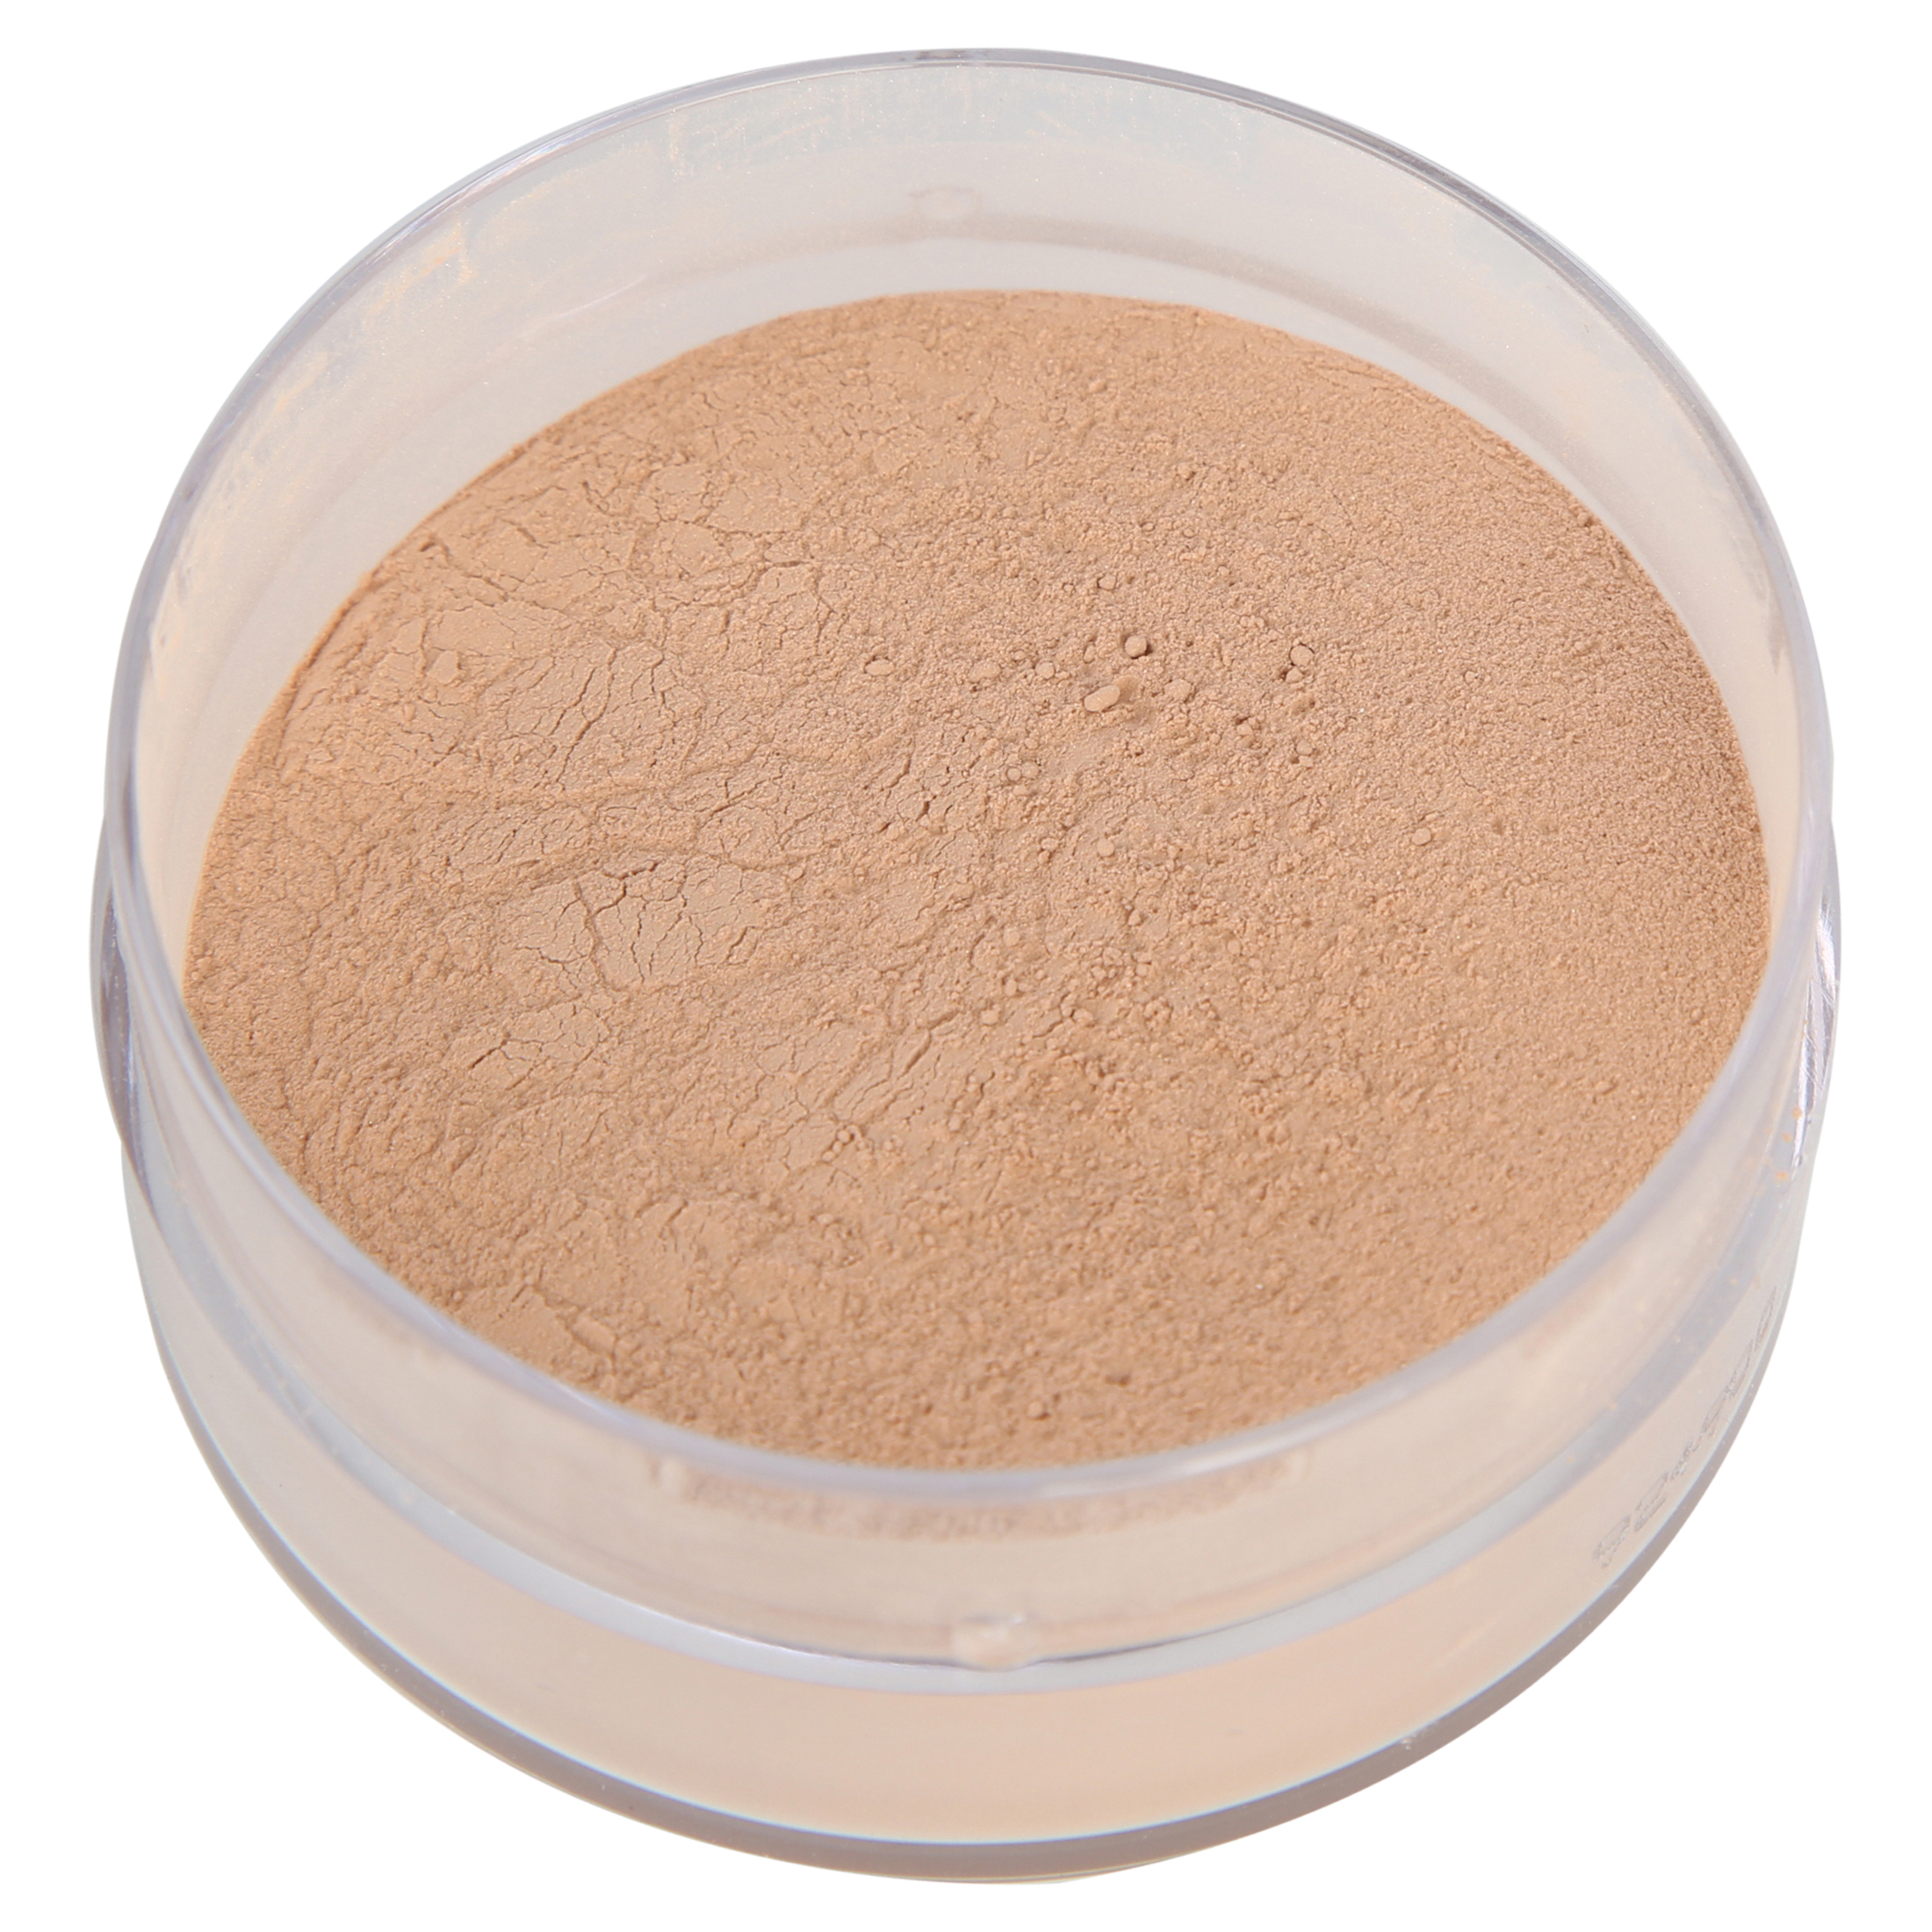 COVERGIRL TruBlend Loose Mineral Powder, 100 Fair, 0.63 oz, Setting Powder, Loose Powder, Enriched with Minerals, Easy Application, Soft, Even-Toned, Fresh Complextion - image 5 of 7